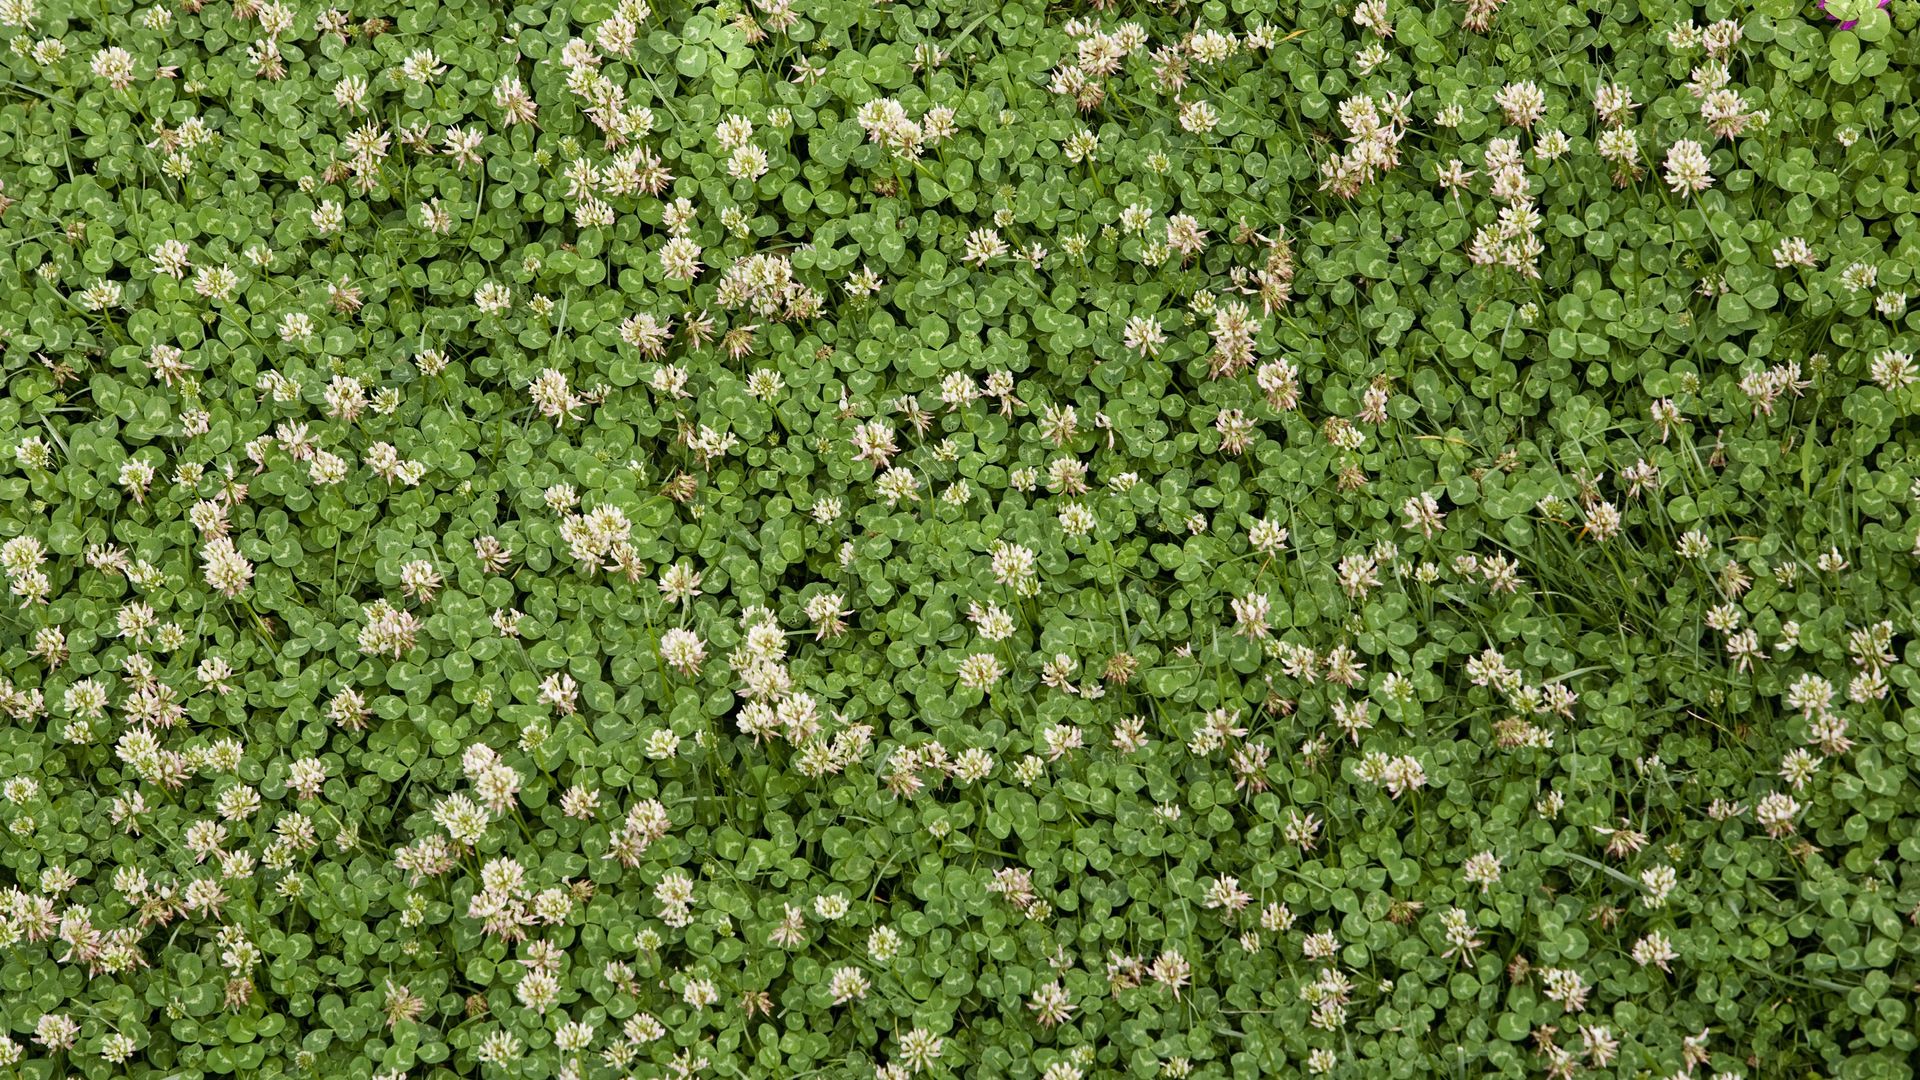 A field of white clover.